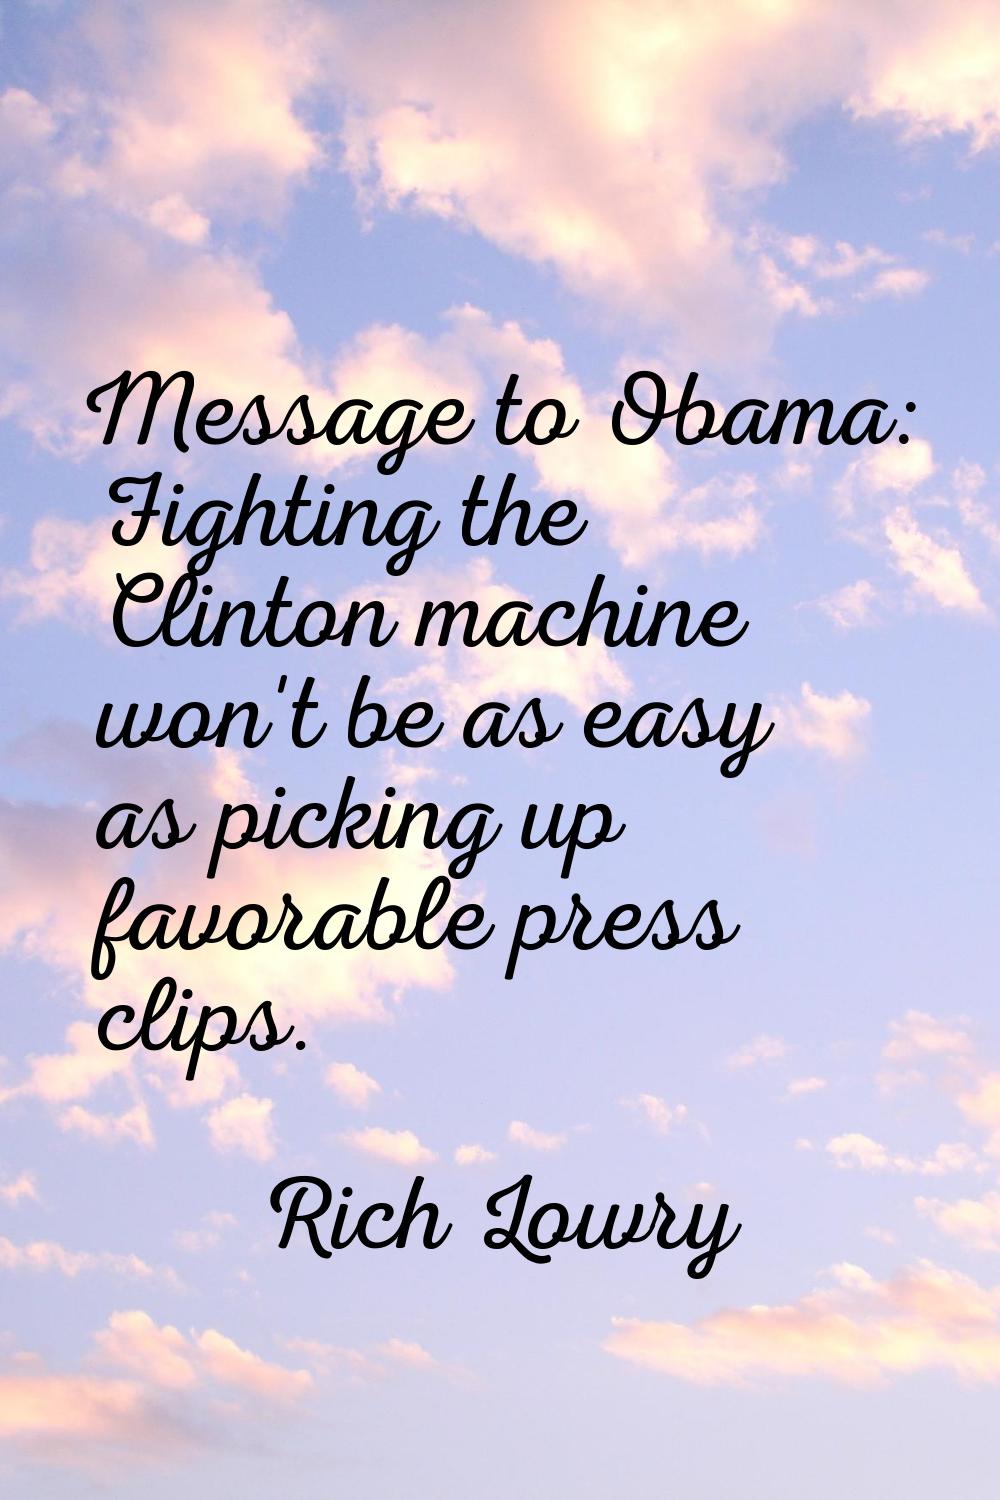 Message to Obama: Fighting the Clinton machine won't be as easy as picking up favorable press clips